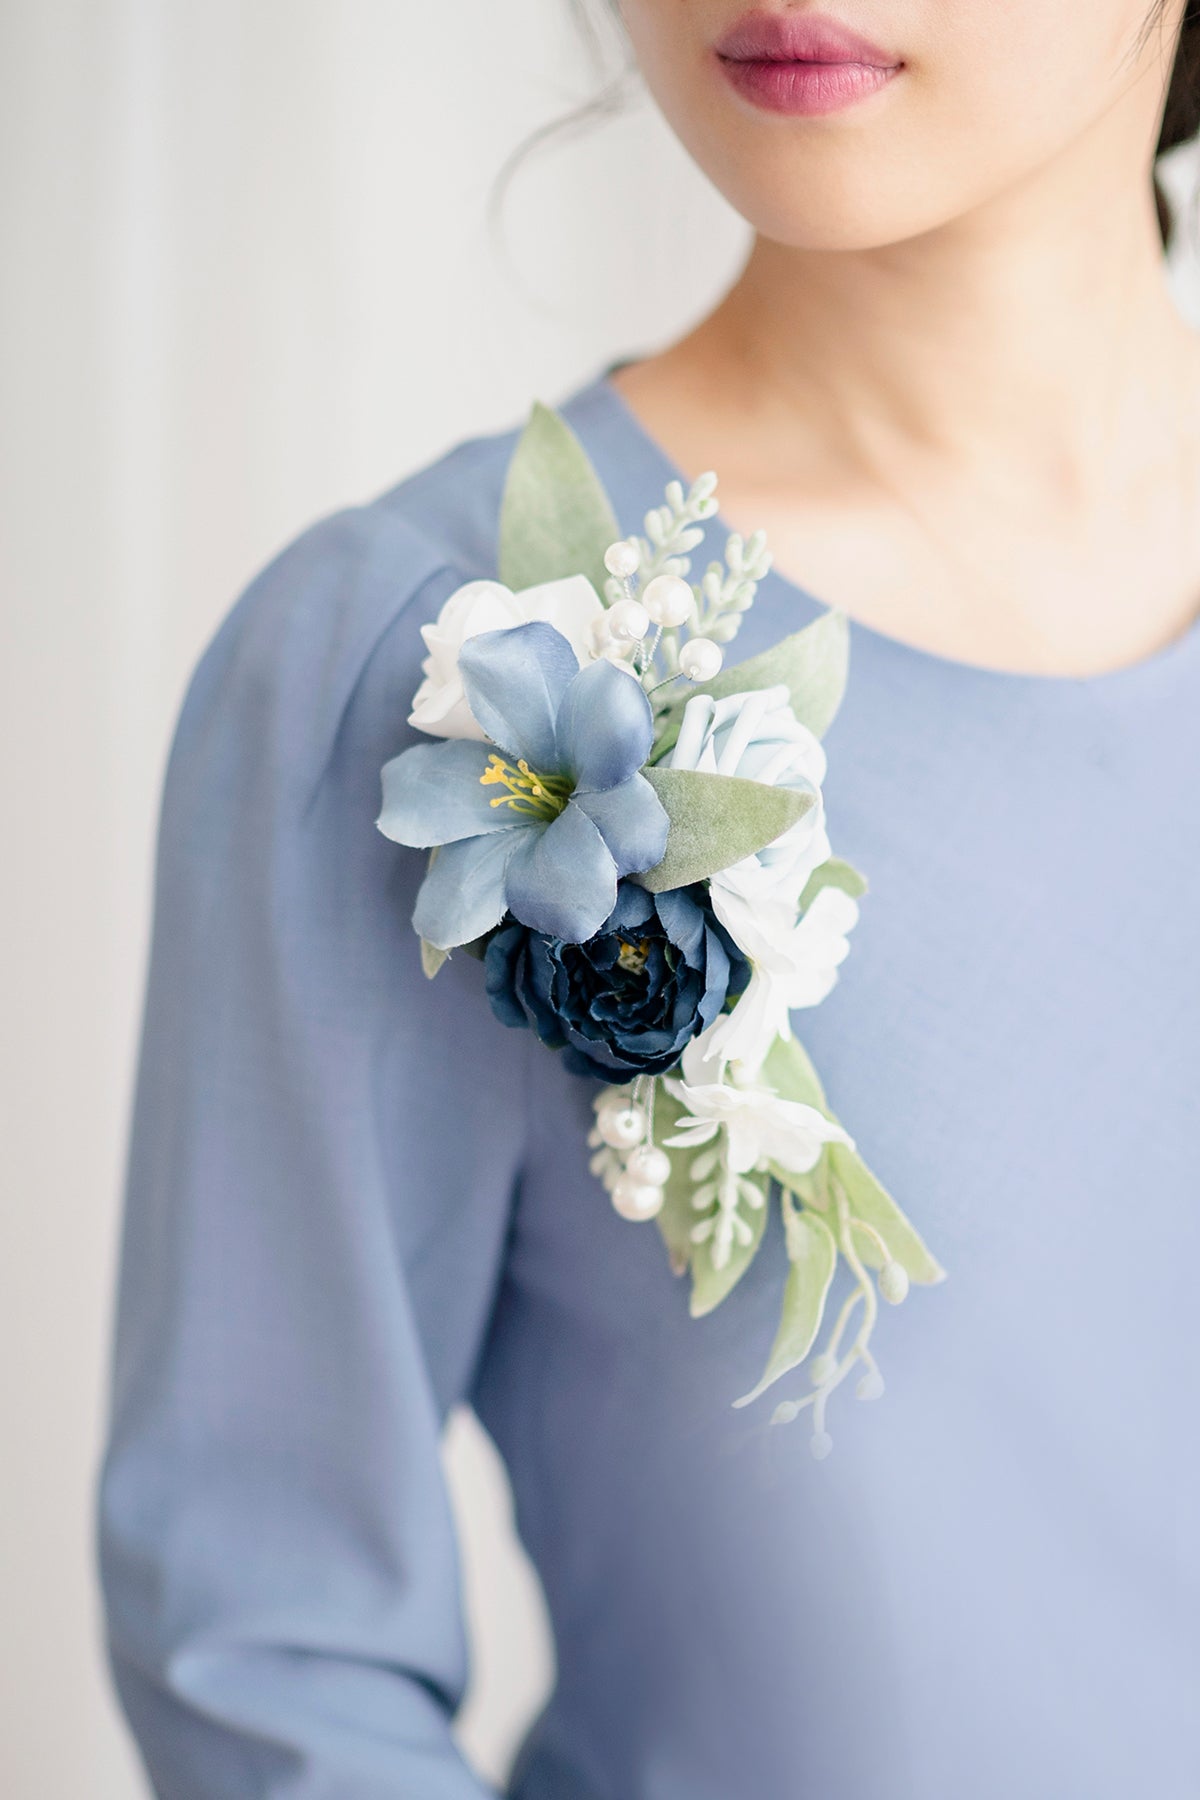 Shoulder Corsages in Dusty Blue & Navy